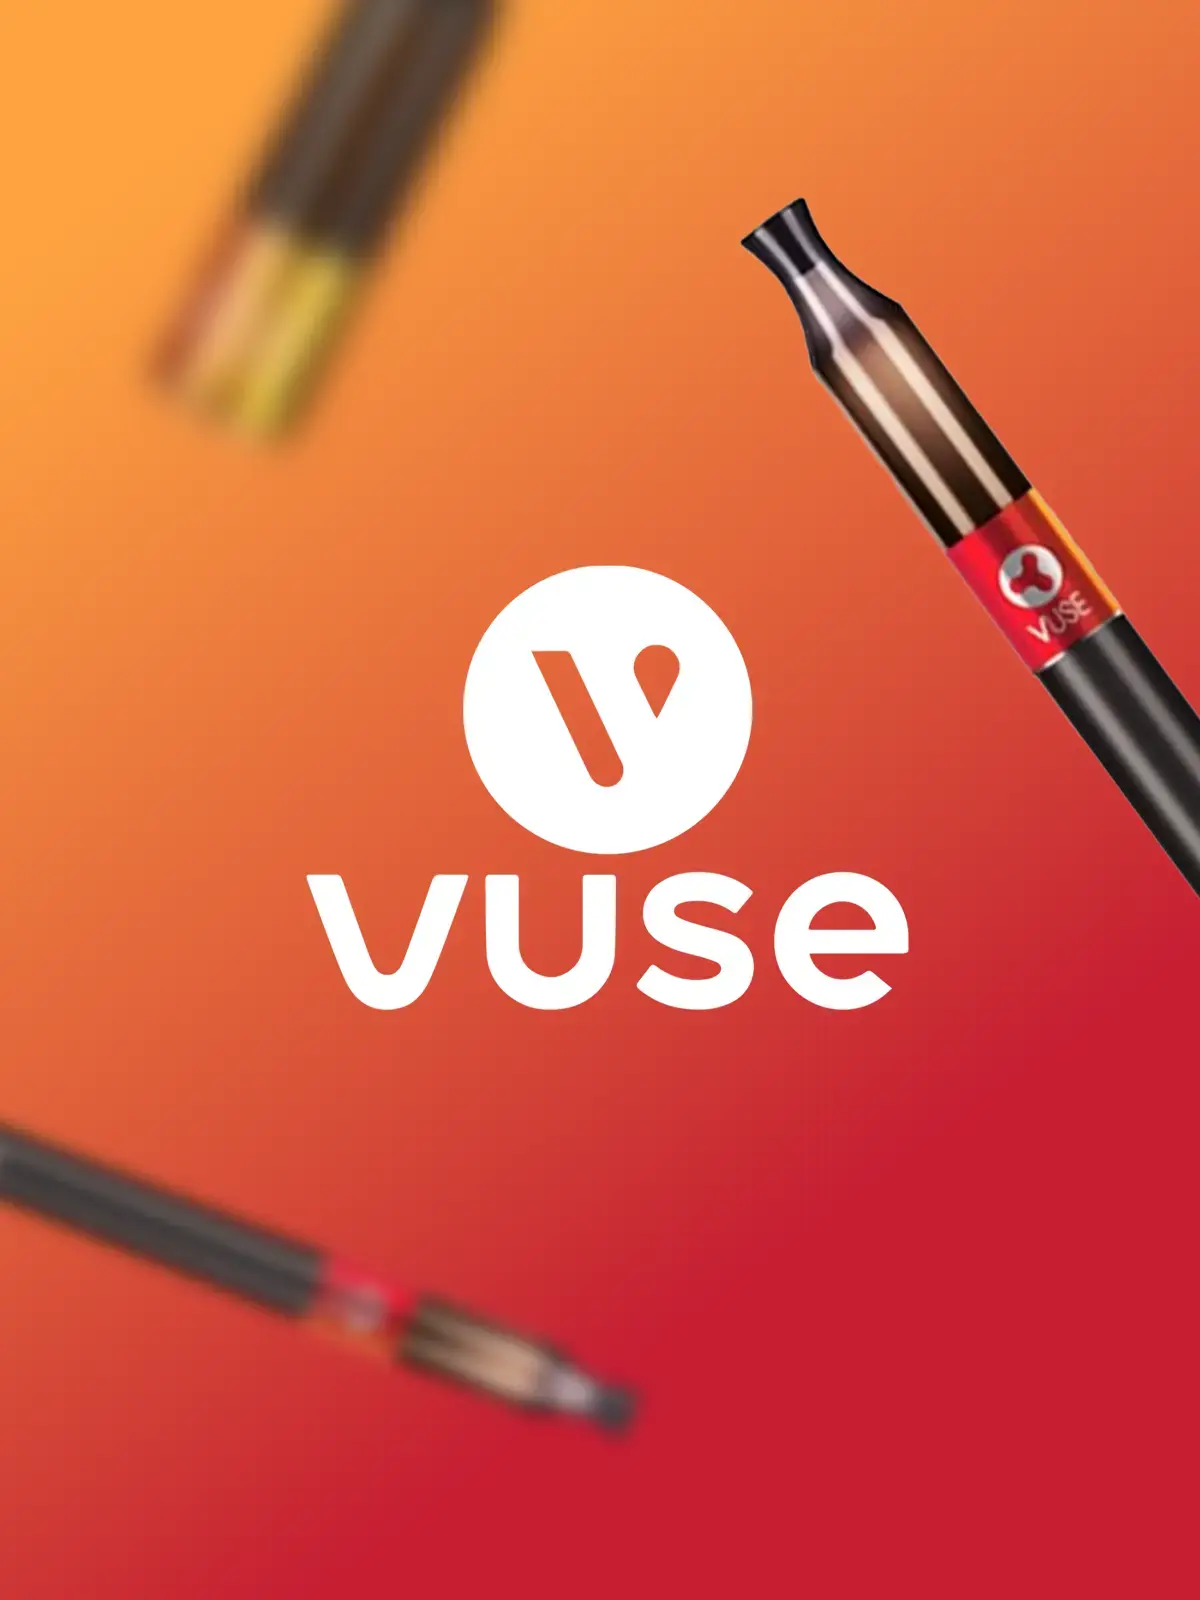 Vuse Logo surrounded by a Vuse Vibe device in the foreground, with one blurred in the background along with a Vuse Vibe refill tank